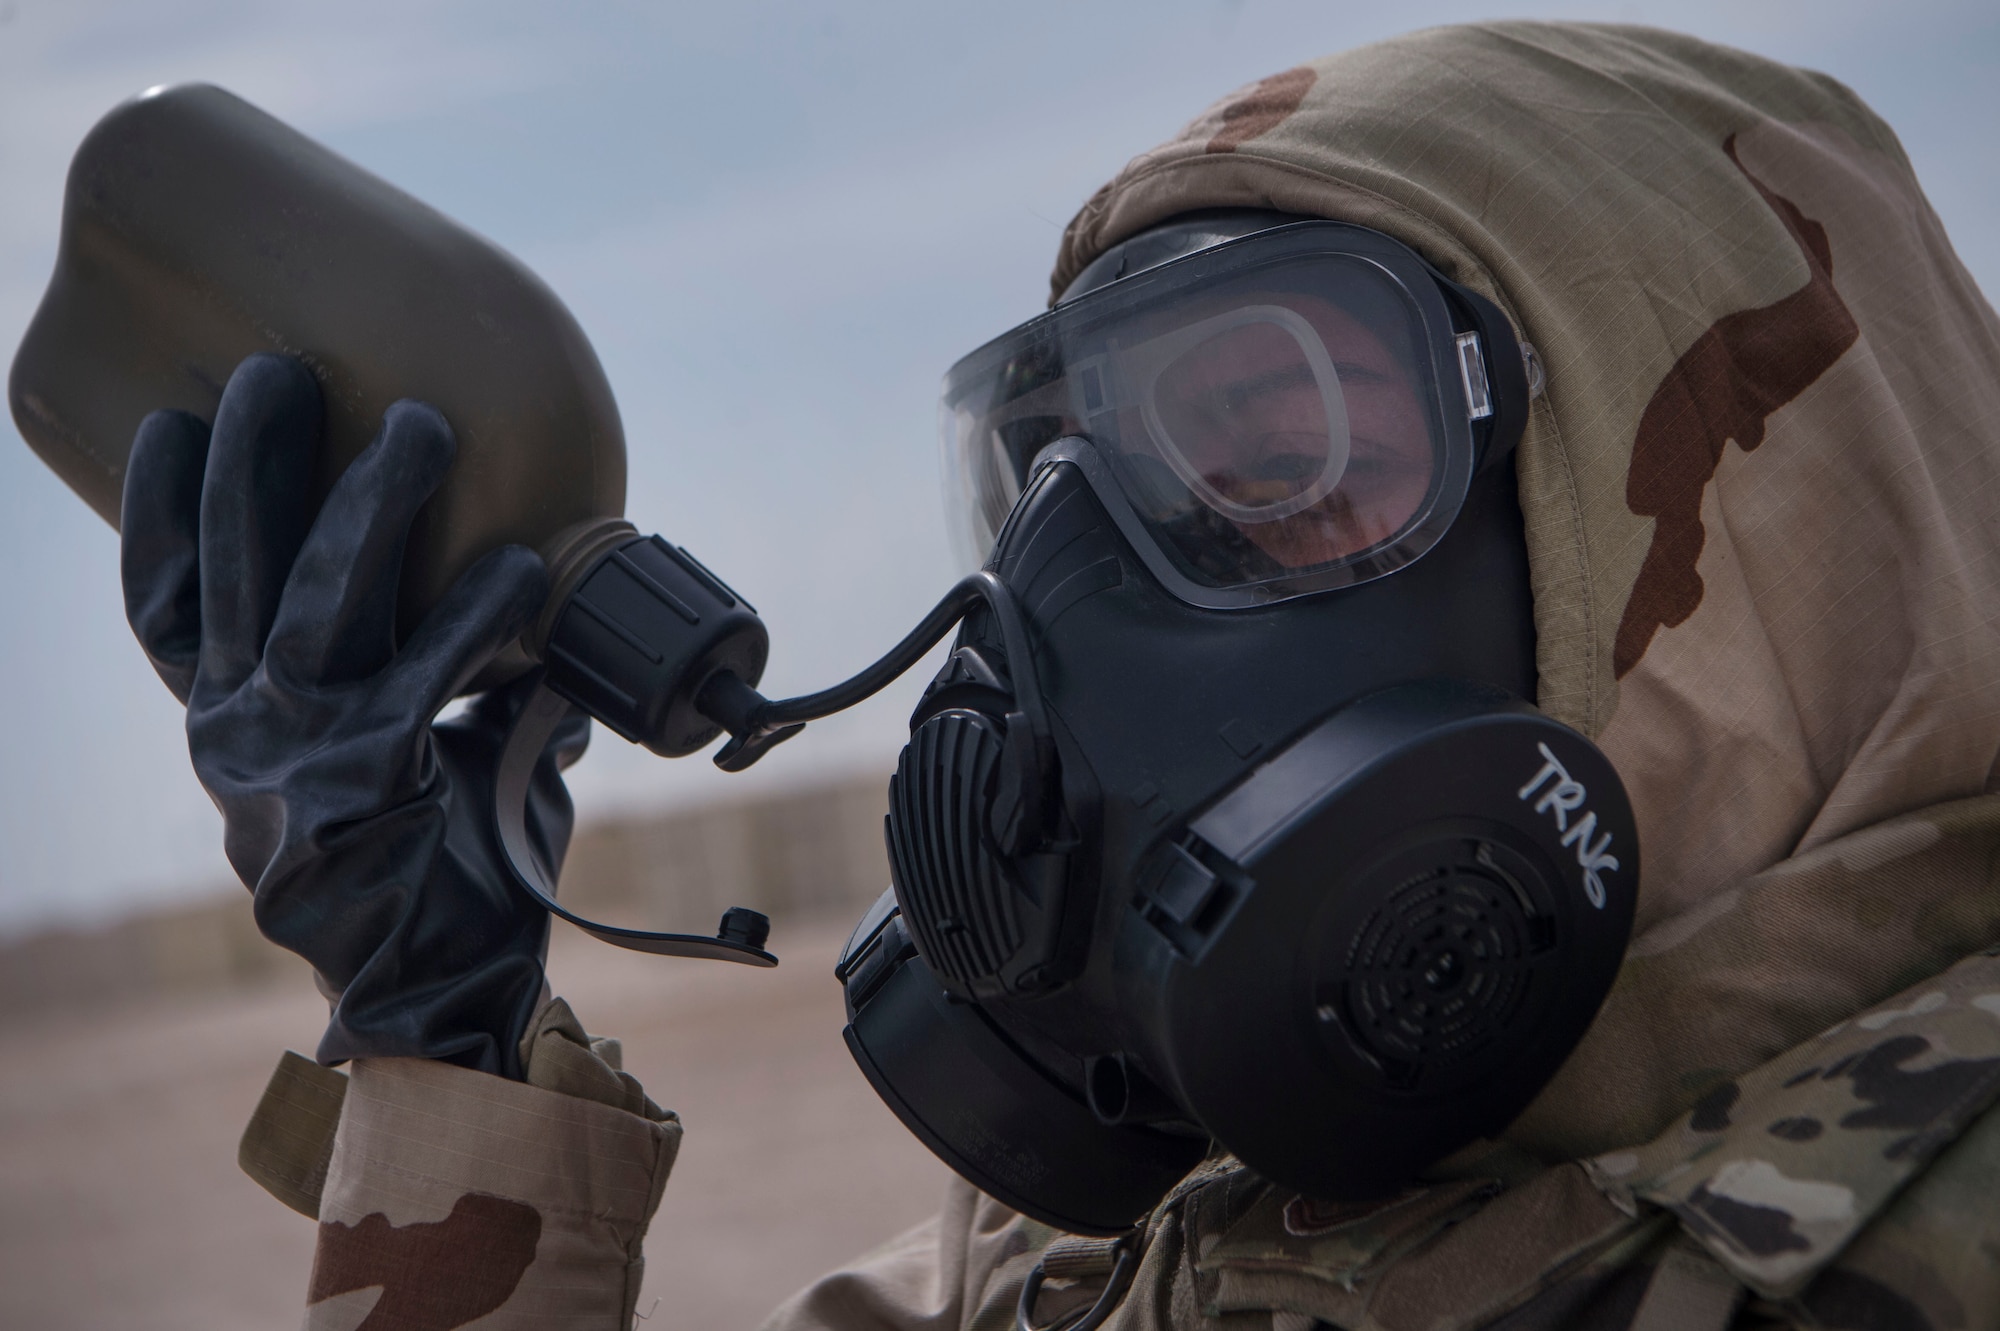 A U.S. Air Force Airman of the 379th Expeditionary Civil Engineer Squadron (ECES) emergency management office, hydrates during a joint decontamination exercise Feb. 22, 2019, at Al Udeid Air Base, Qatar. U.S. Air Force and Army participants from the 379th Expeditionary Civil Engineer Squadron and the 1st Battalion, 43rd Air Defense Artillery regiment, 11th ADA Brigade, shared Chemical, Biological, Radiological, Nuclear, and high yield explosives (CBRNE) best practices, and tested their response proficiency during the training. The event was the conclusion of a four phase training curriculum. (U.S. Air Force photo by Tech. Sgt. Christopher Hubenthal)